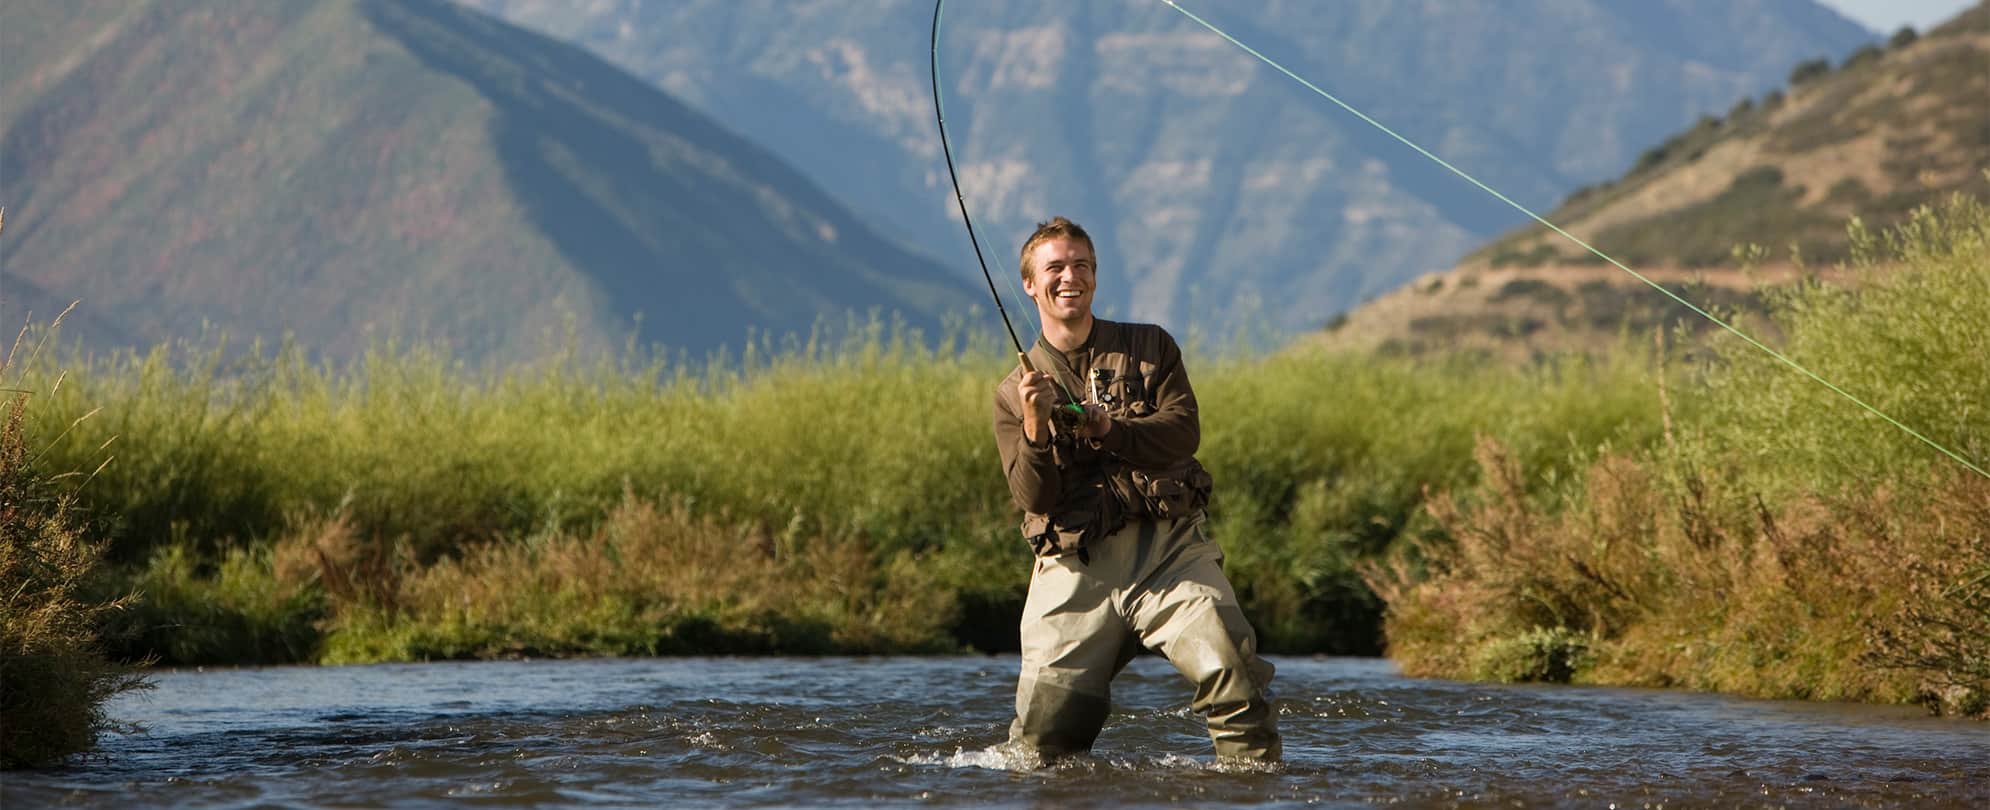 A smiling man fishing in a river with mountains in the background in Park City, Utah.